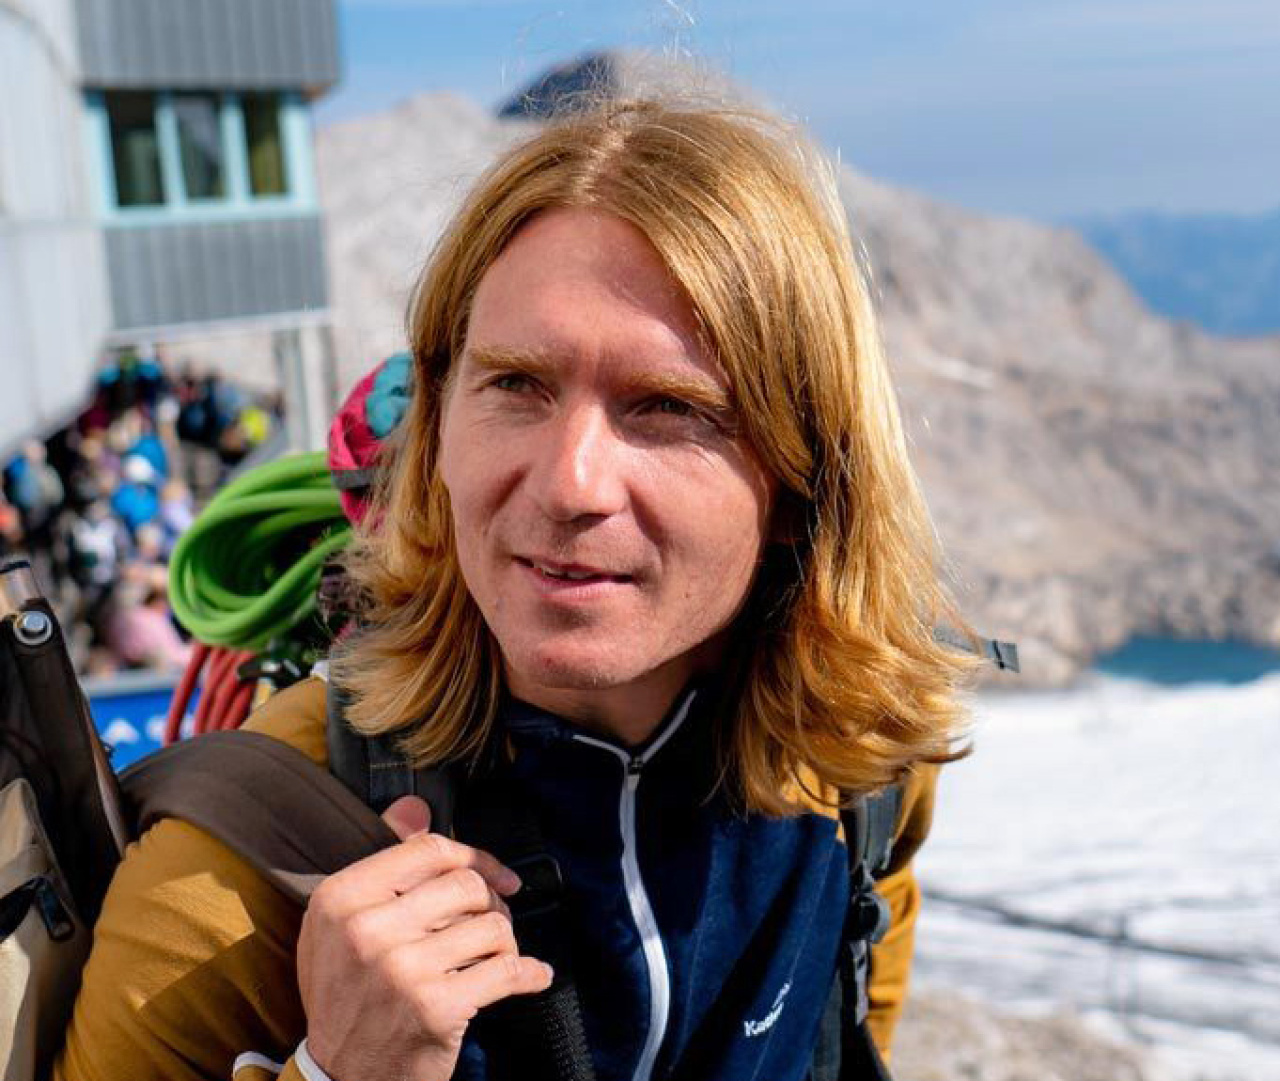 The picture shows the artist Markus jeschanuig. He is pictured outside and seems to be on a hike on a mountain top. He wears open shoulder-length blond hair and looks left out of the picture.